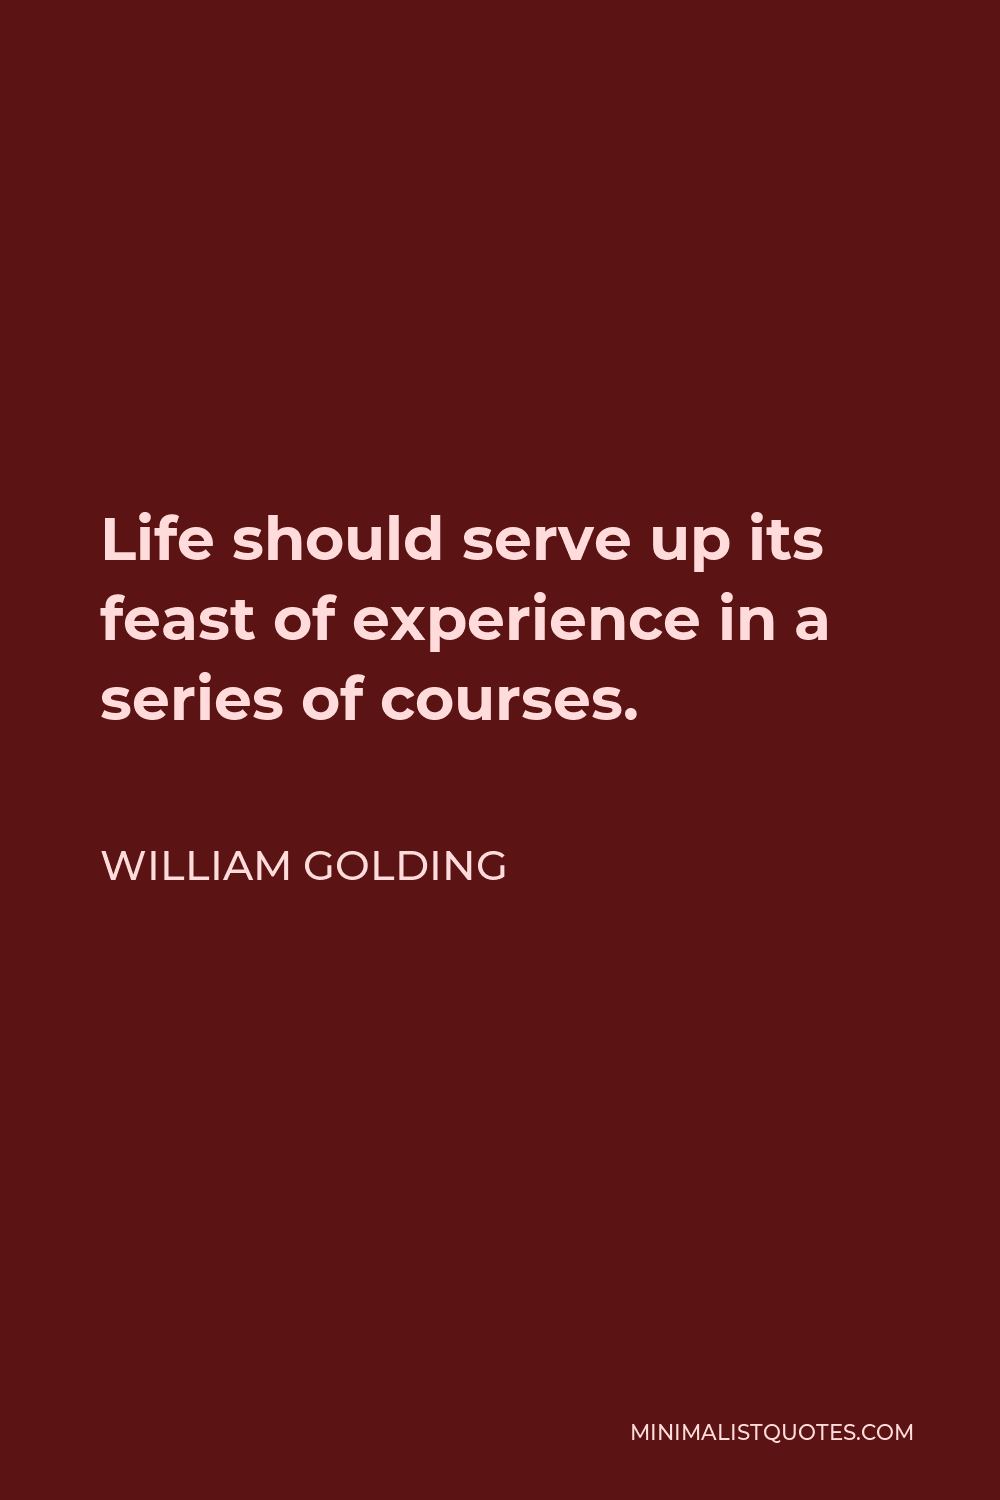 William Golding Quote - Life should serve up its feast of experience in a series of courses.